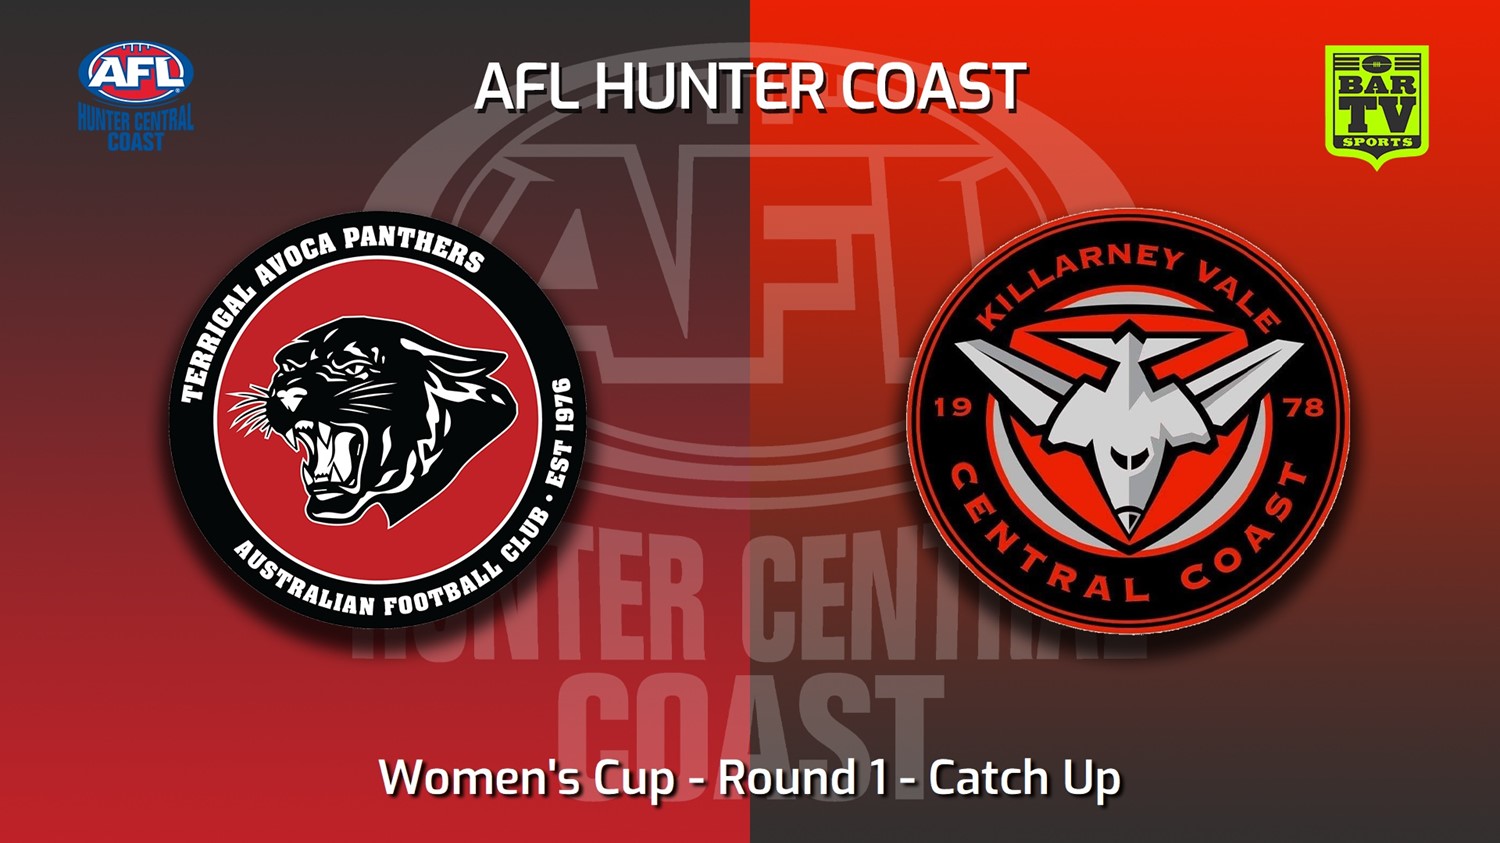 220702-AFL Hunter Central Coast Round 1 - Catch Up - Women's Cup - Terrigal Avoca Panthers v Killarney Vale Bombers Slate Image